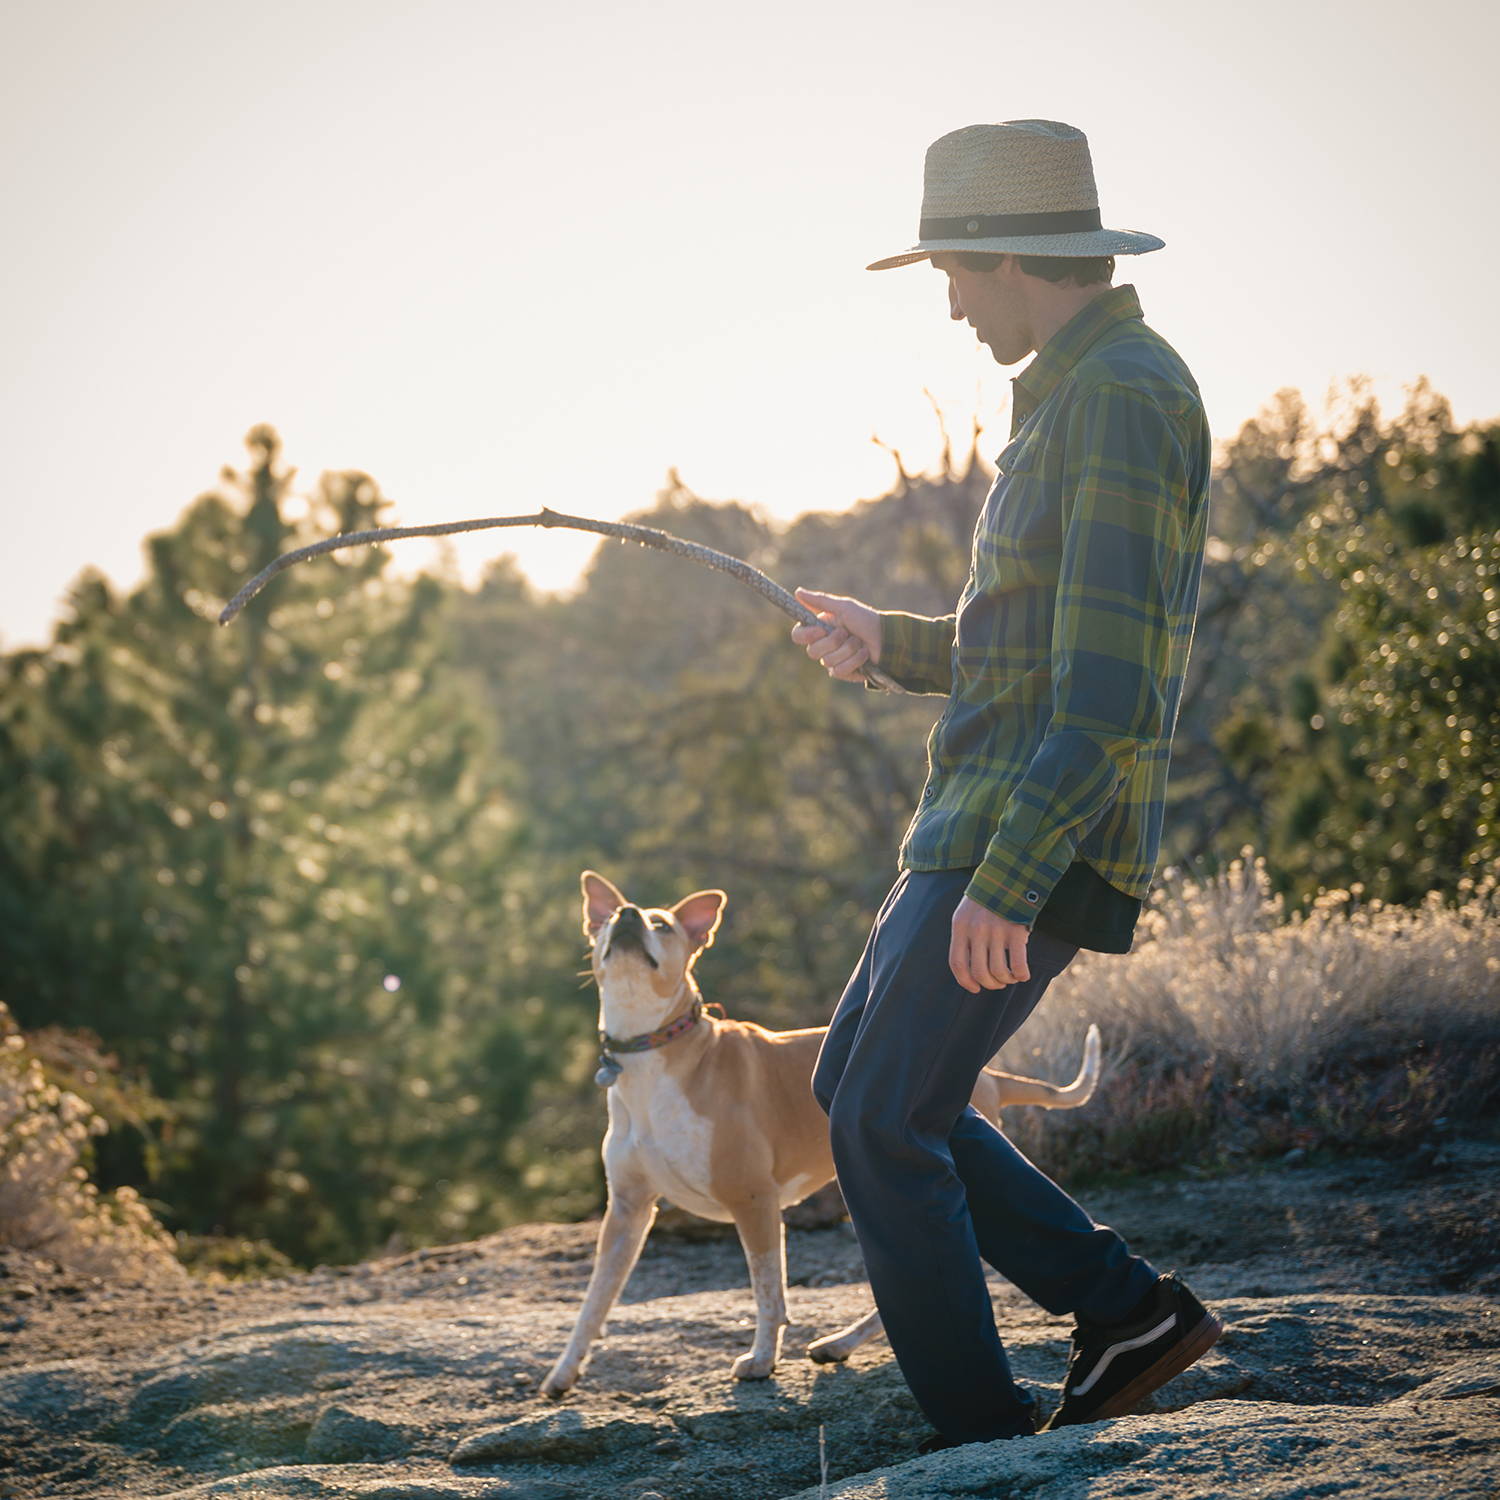 Man in Palmer hat in the mountains playing with a dog